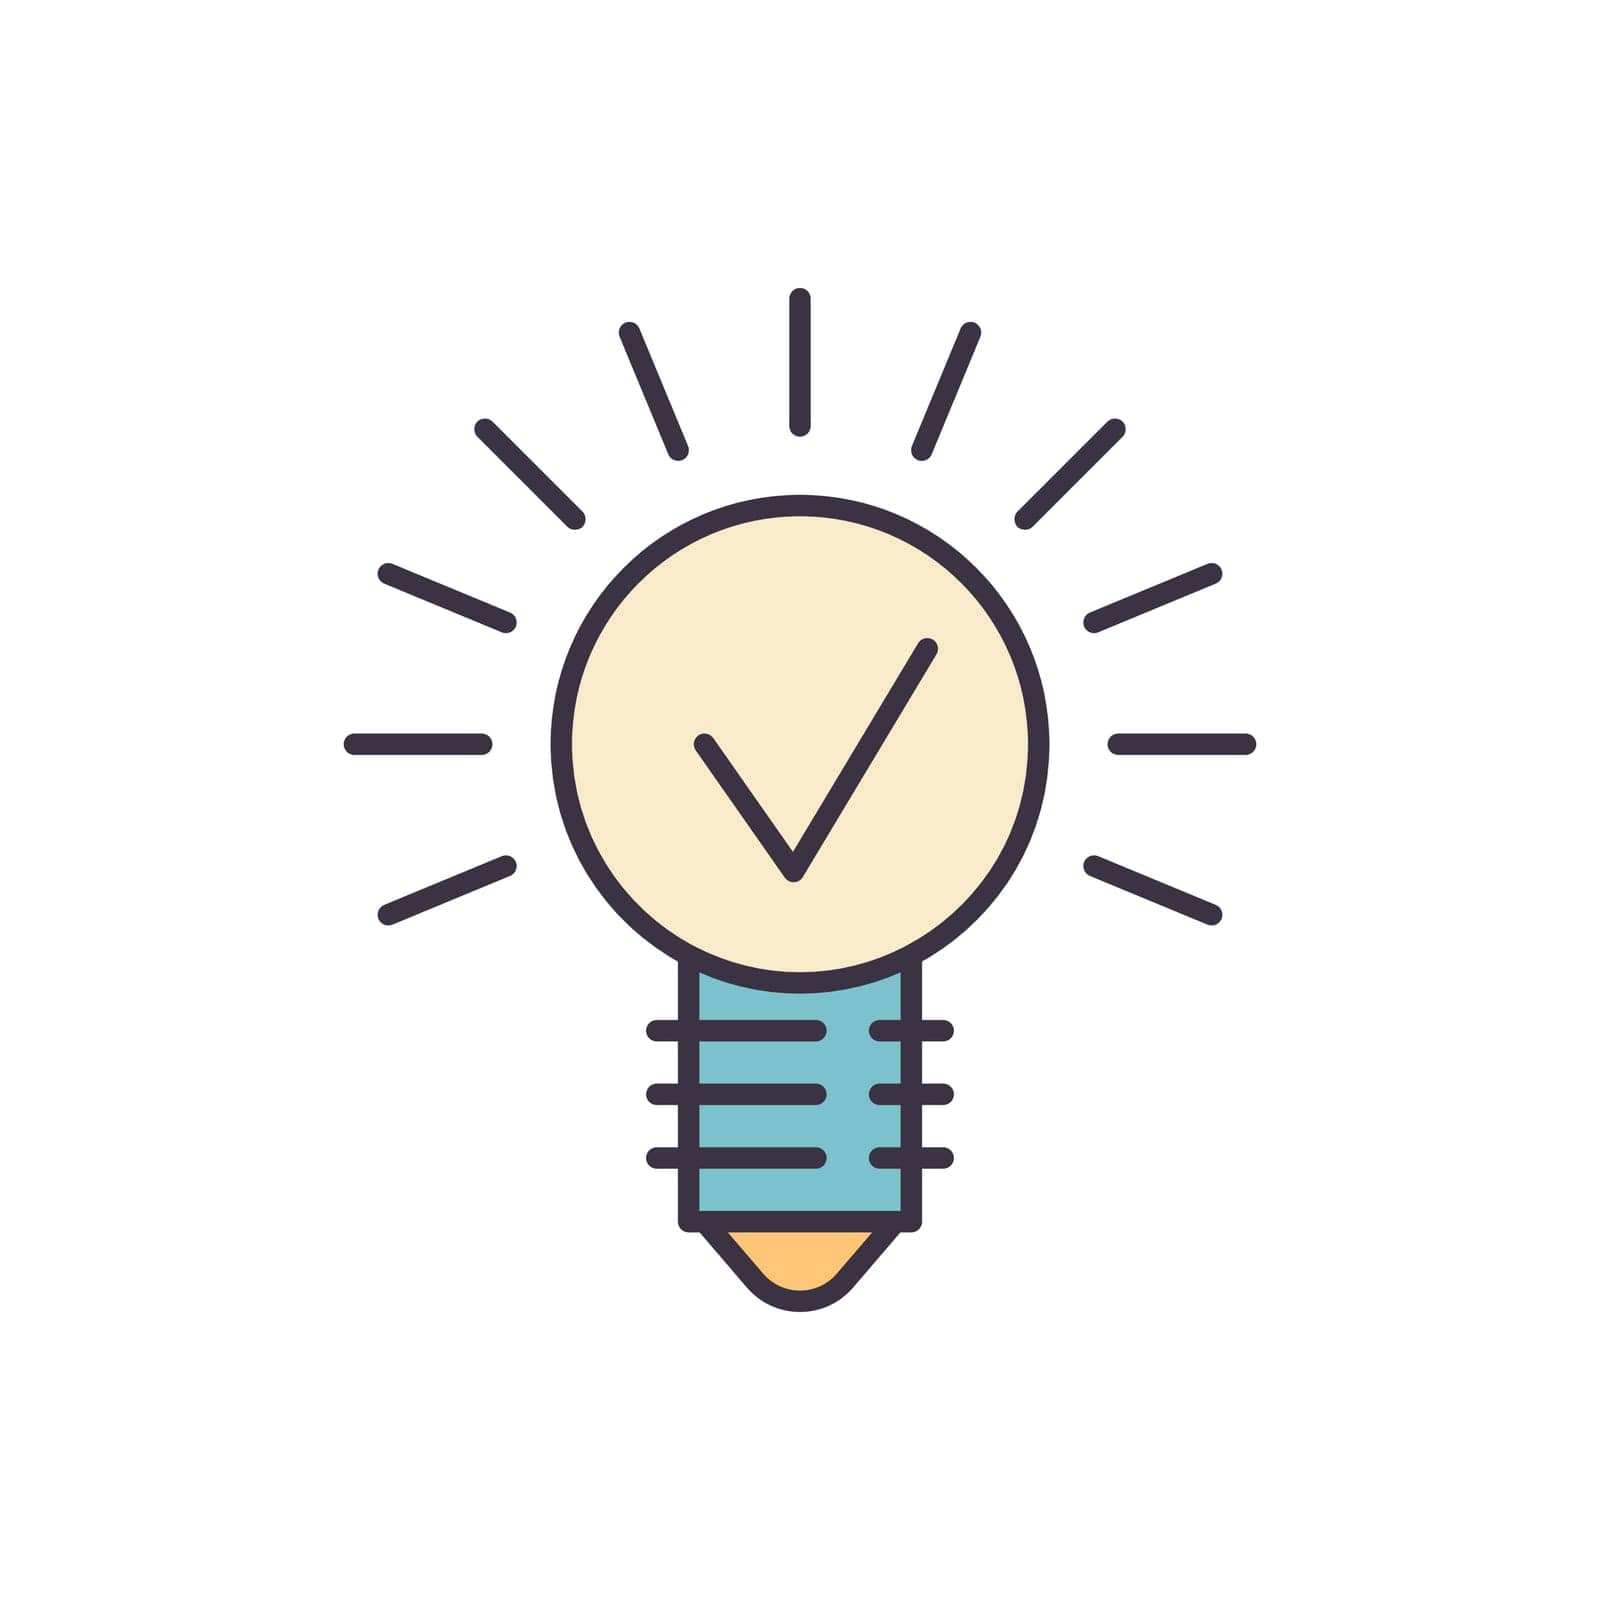 Bulb Flat related vector icon by smoki